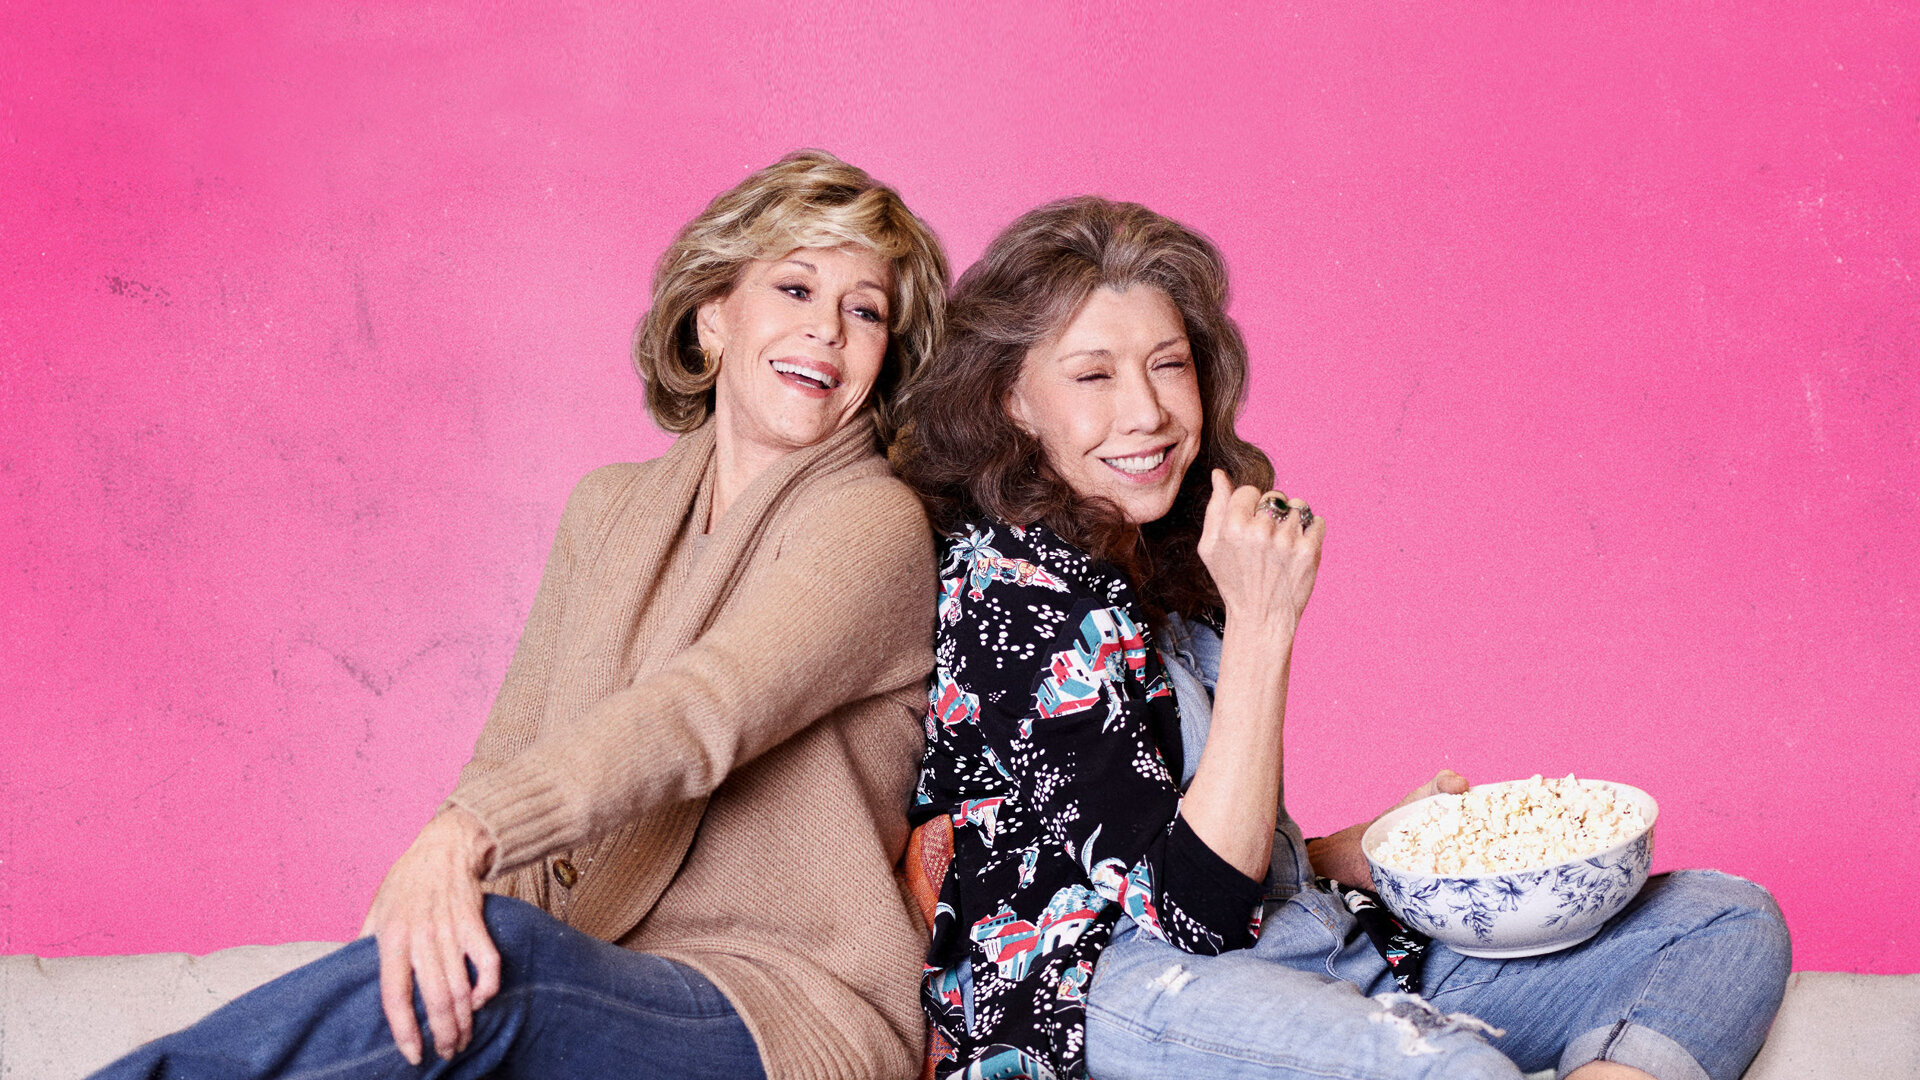 Grace and Frankie, Surprising twist, Netflix series, Daily dose of entertainment, 1920x1080 Full HD Desktop